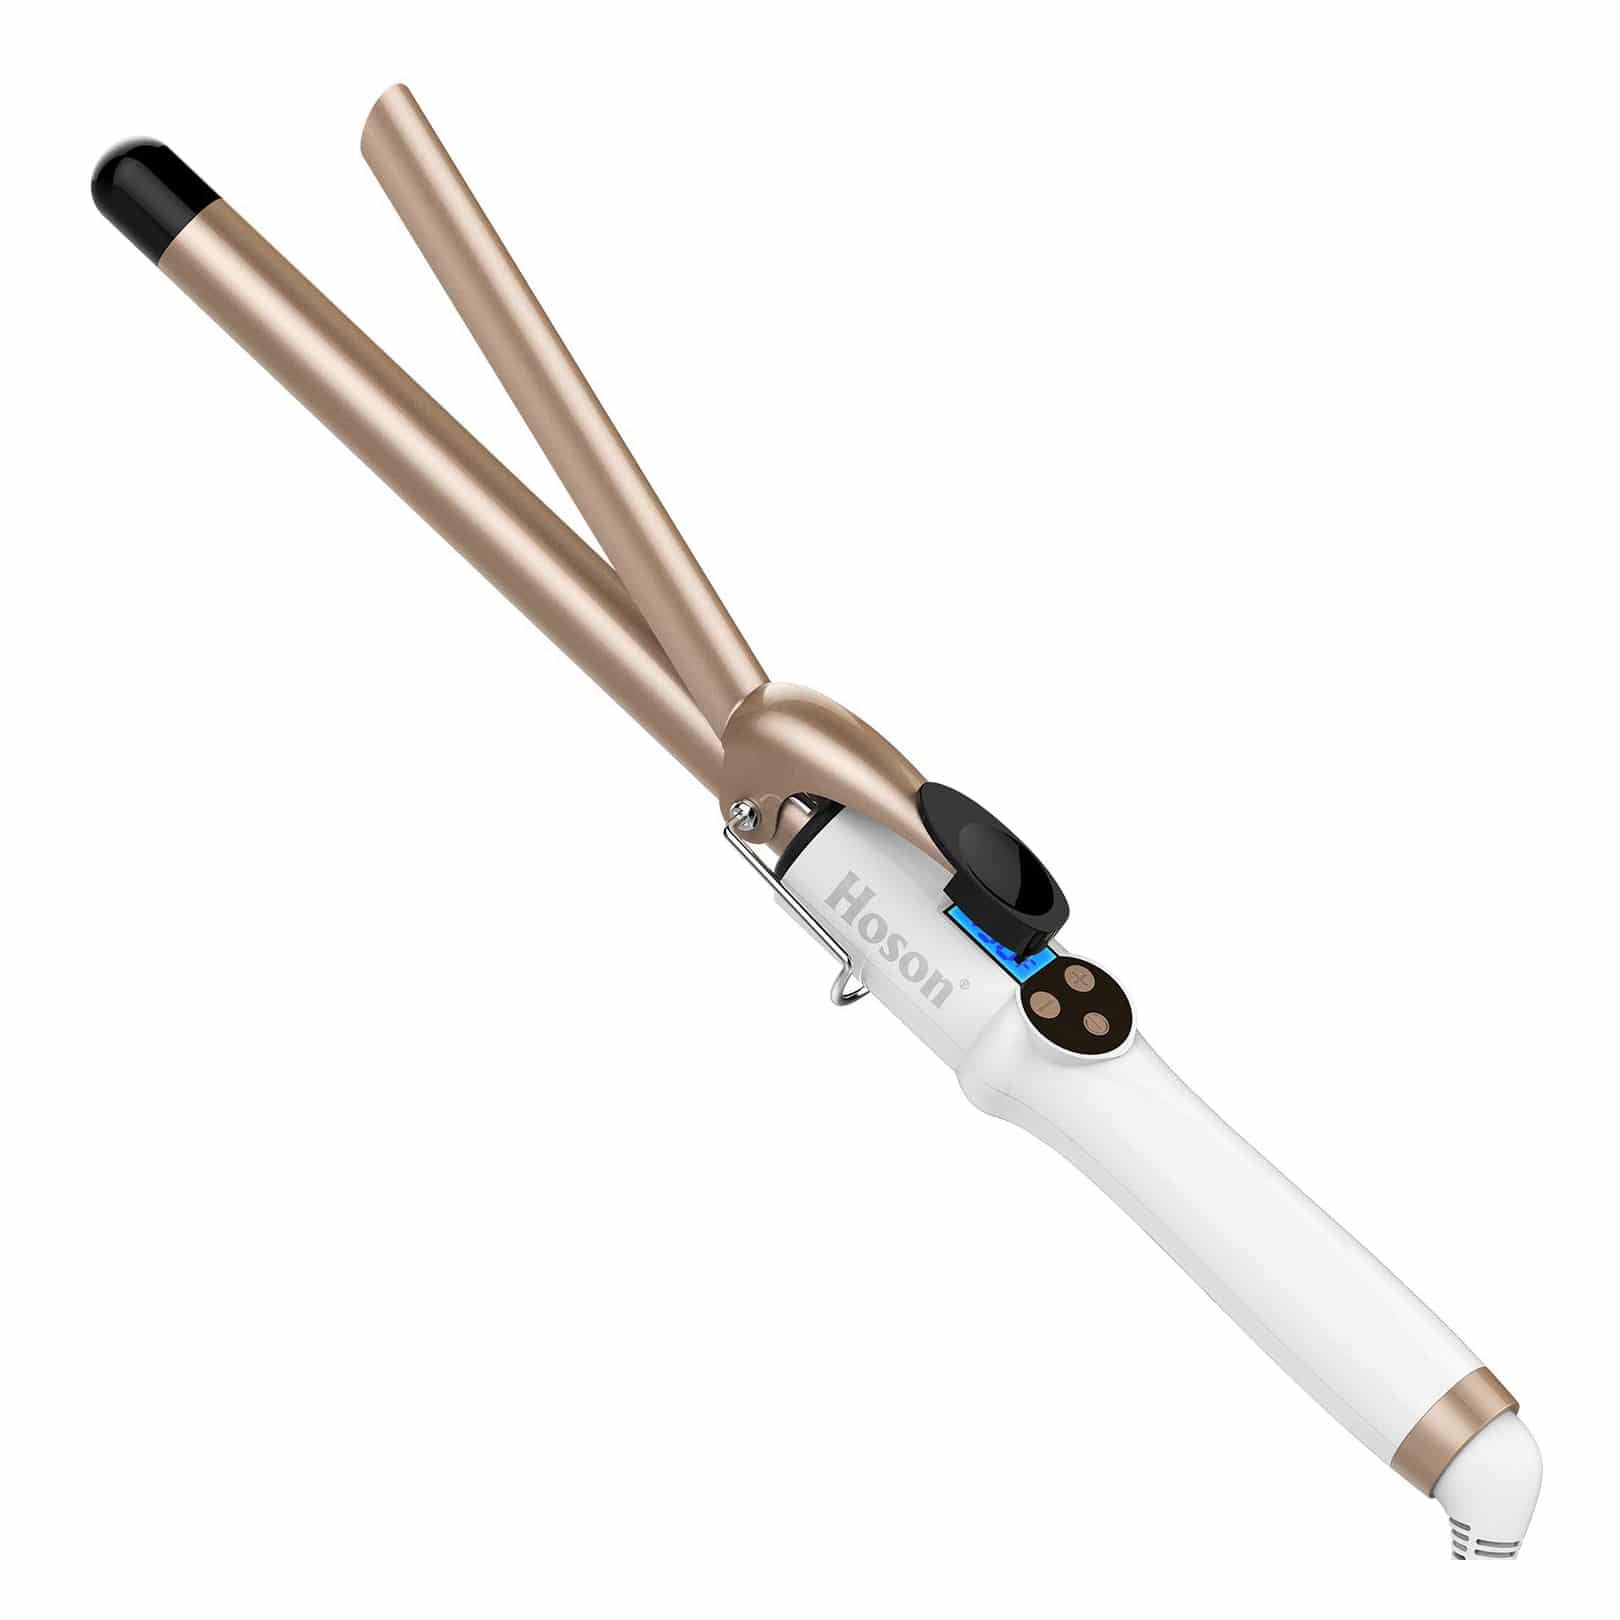 Top 10 Best Curling Irons in 2021 Reviews Buyer’s Guide